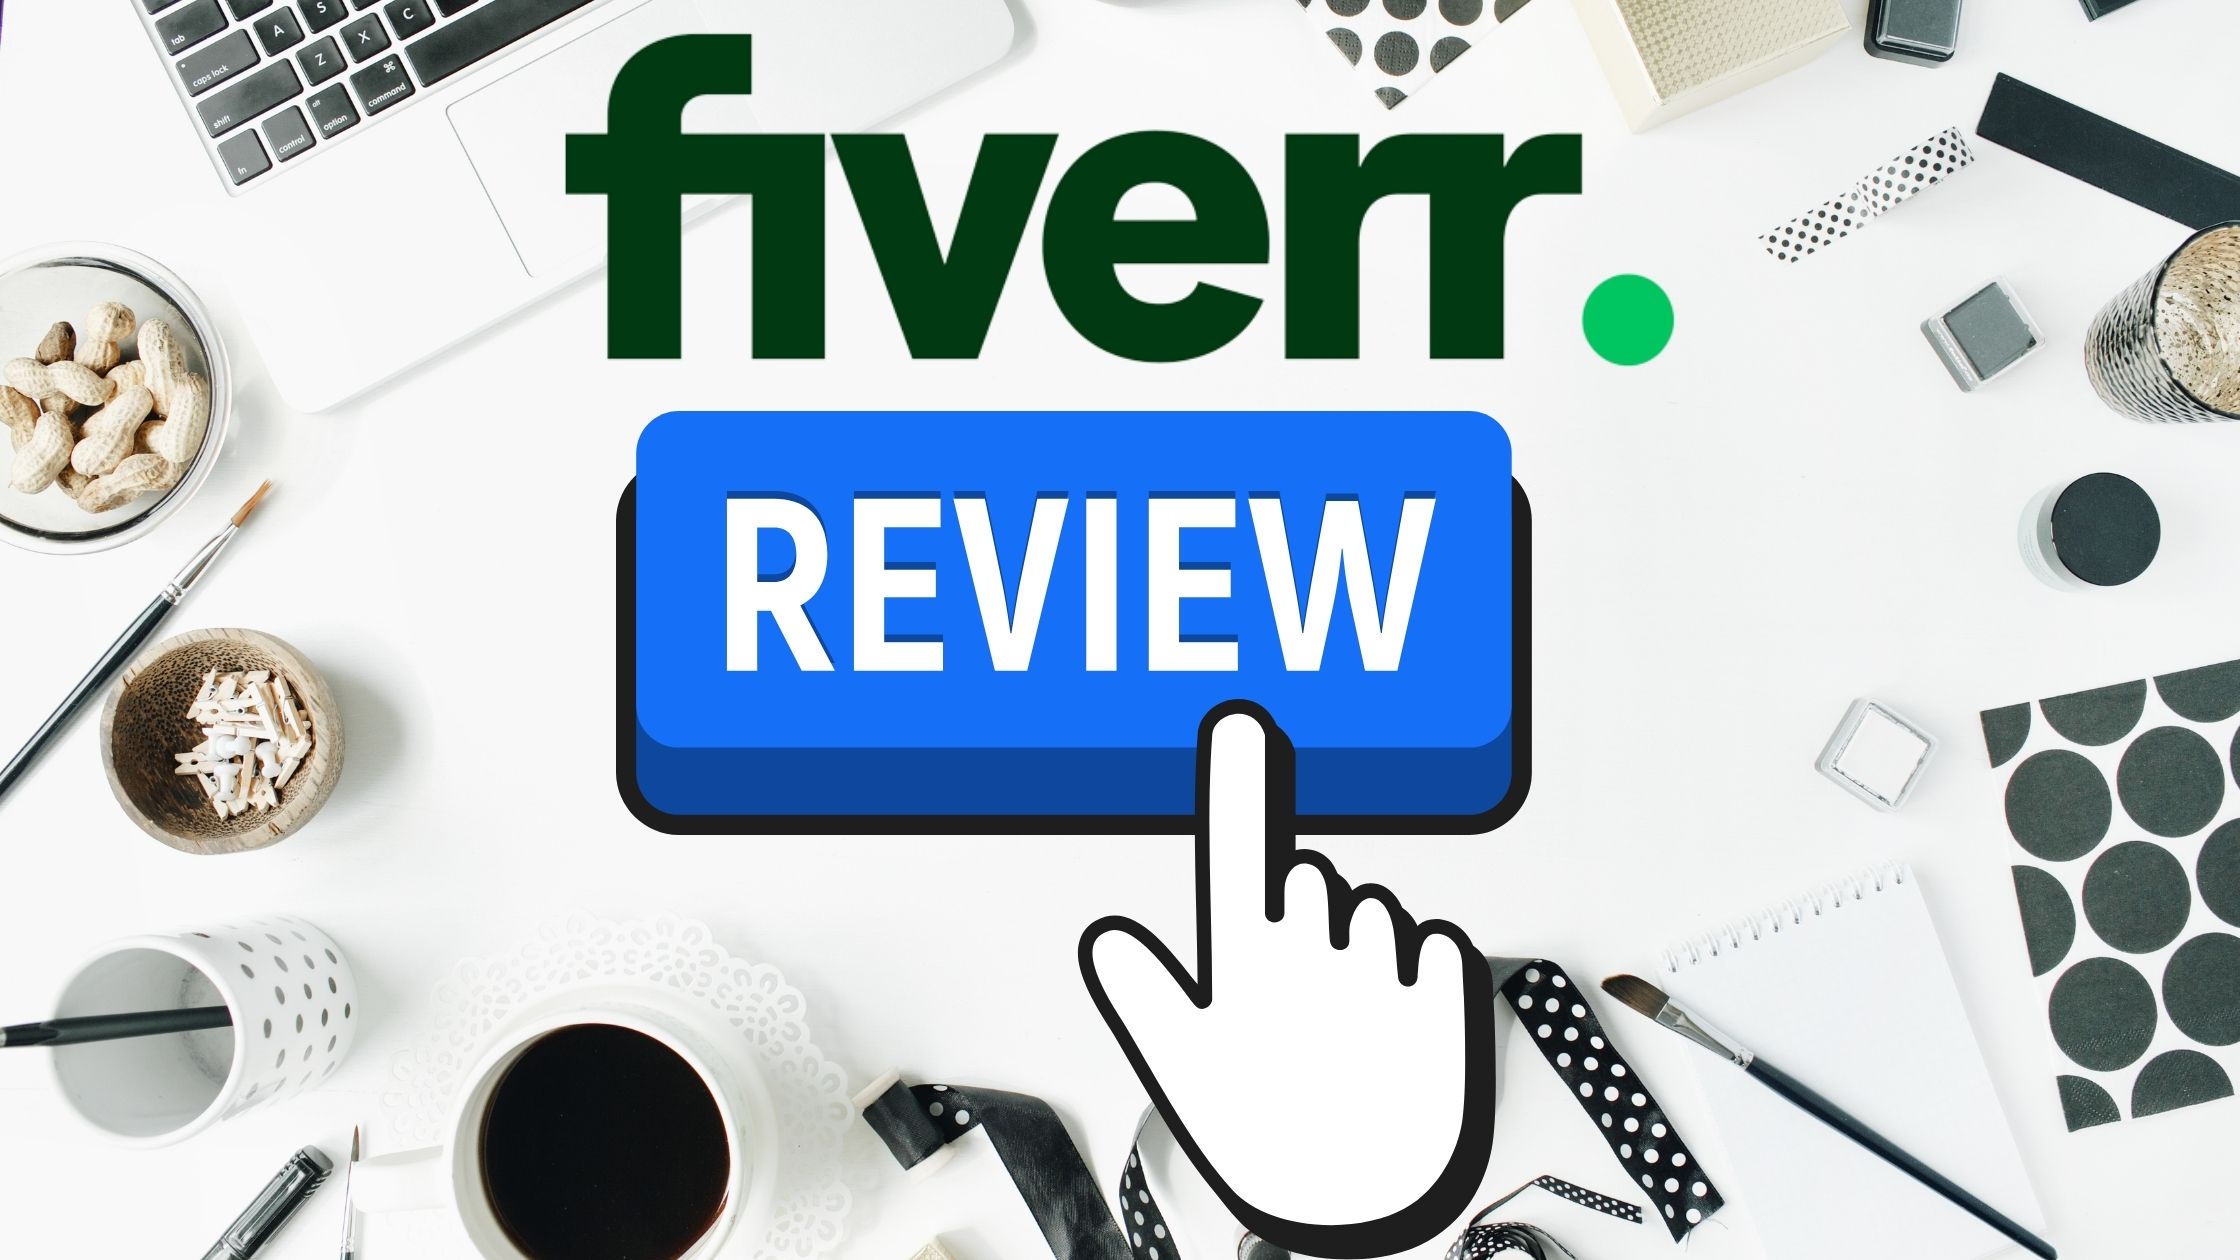 Fiverr Review (100% Honest and Unbiased)- Is it a Scam or Totally Legit?